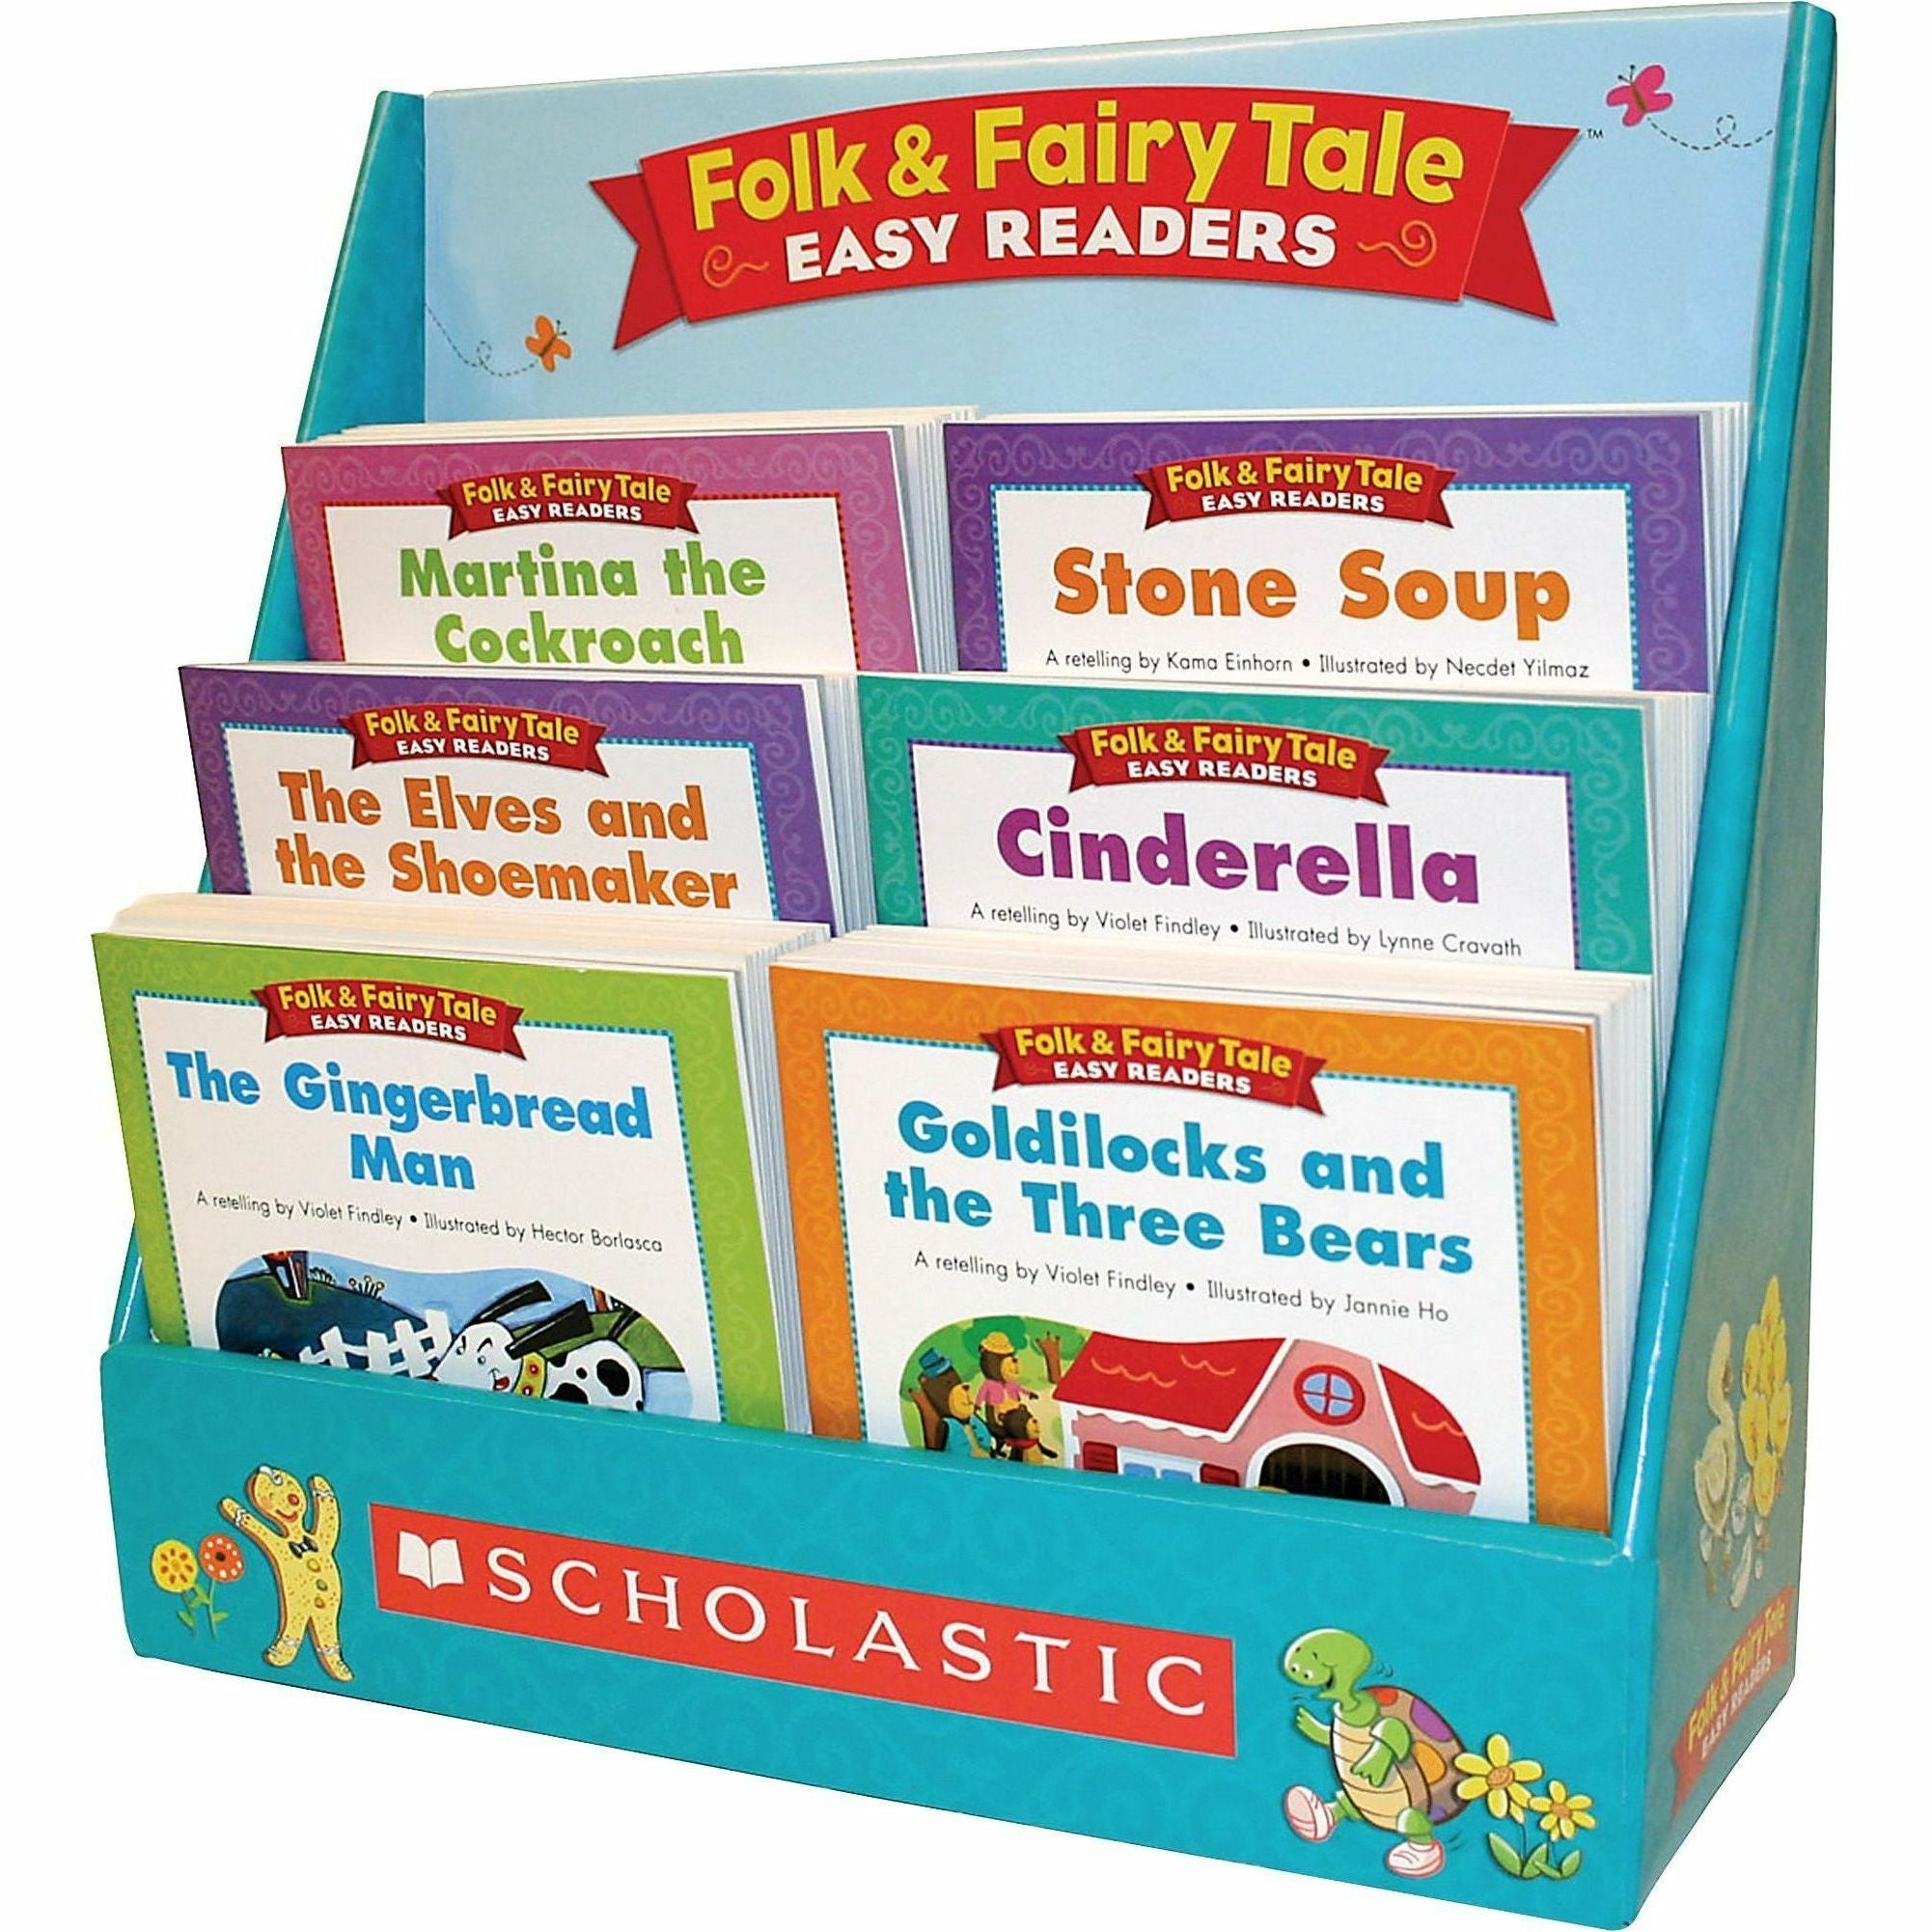 Scholastic Res. Grade K-2 Folk/Fairy Tale Book Collection Printed Book by Liza Charlesworth - Book - Grade K-2 - 